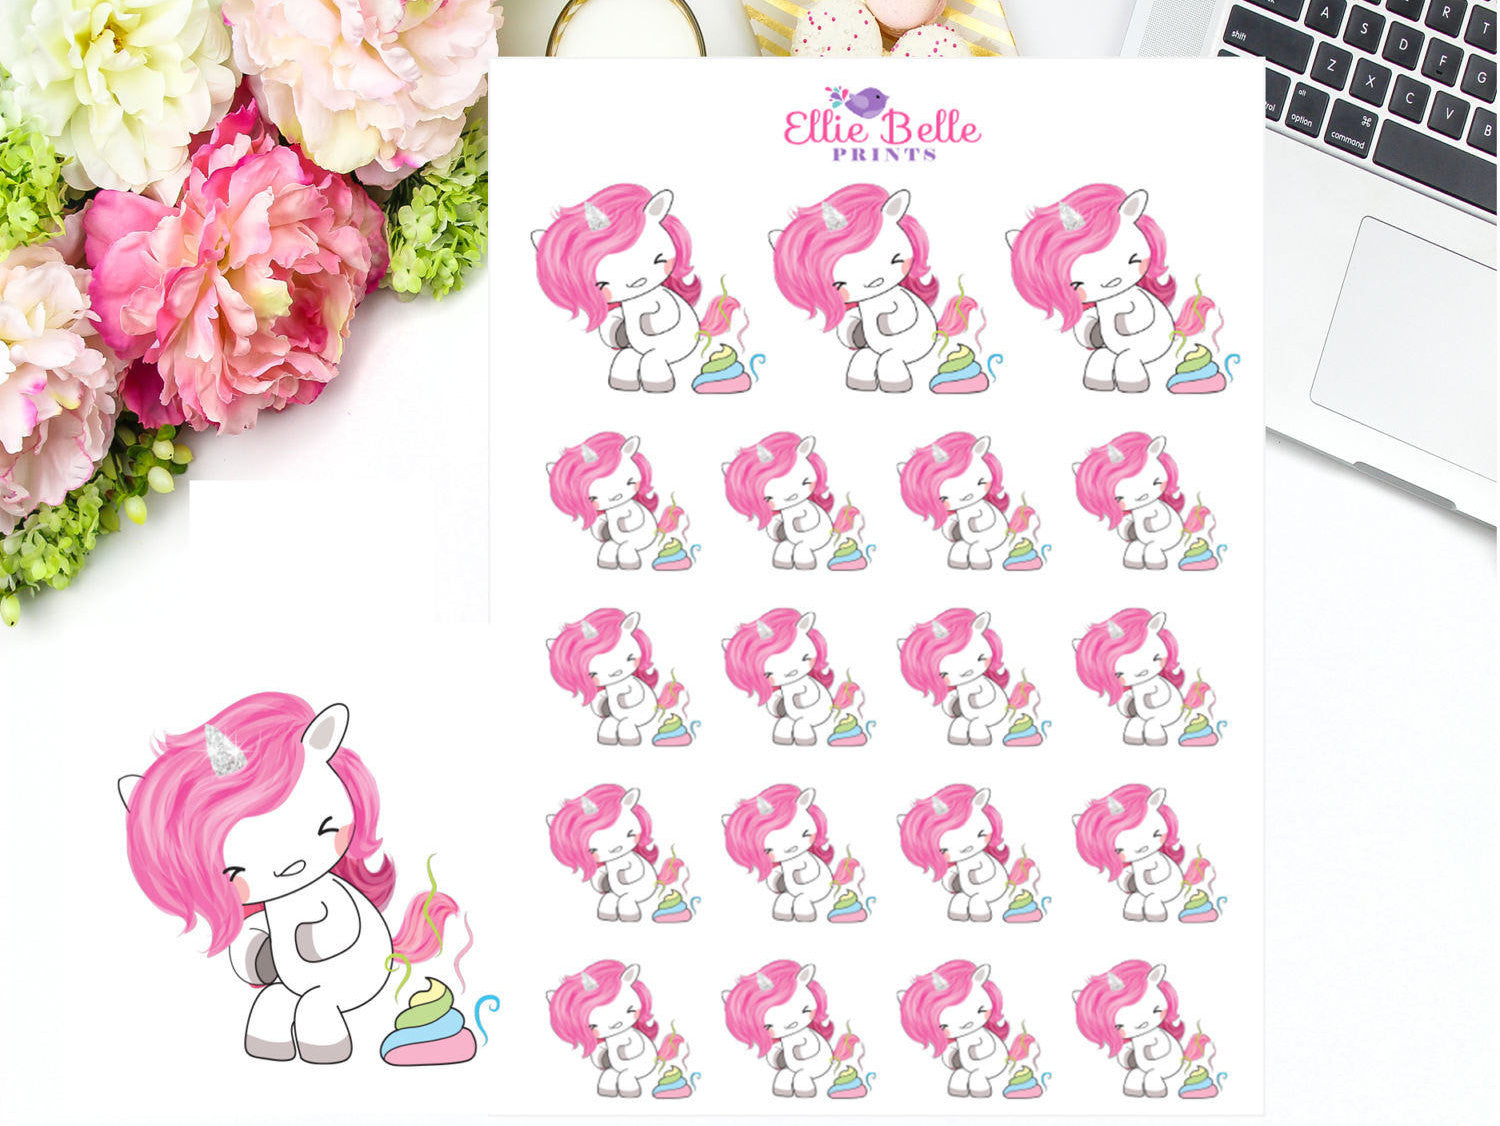 Poo Stickers - Pink Unicorn Collection